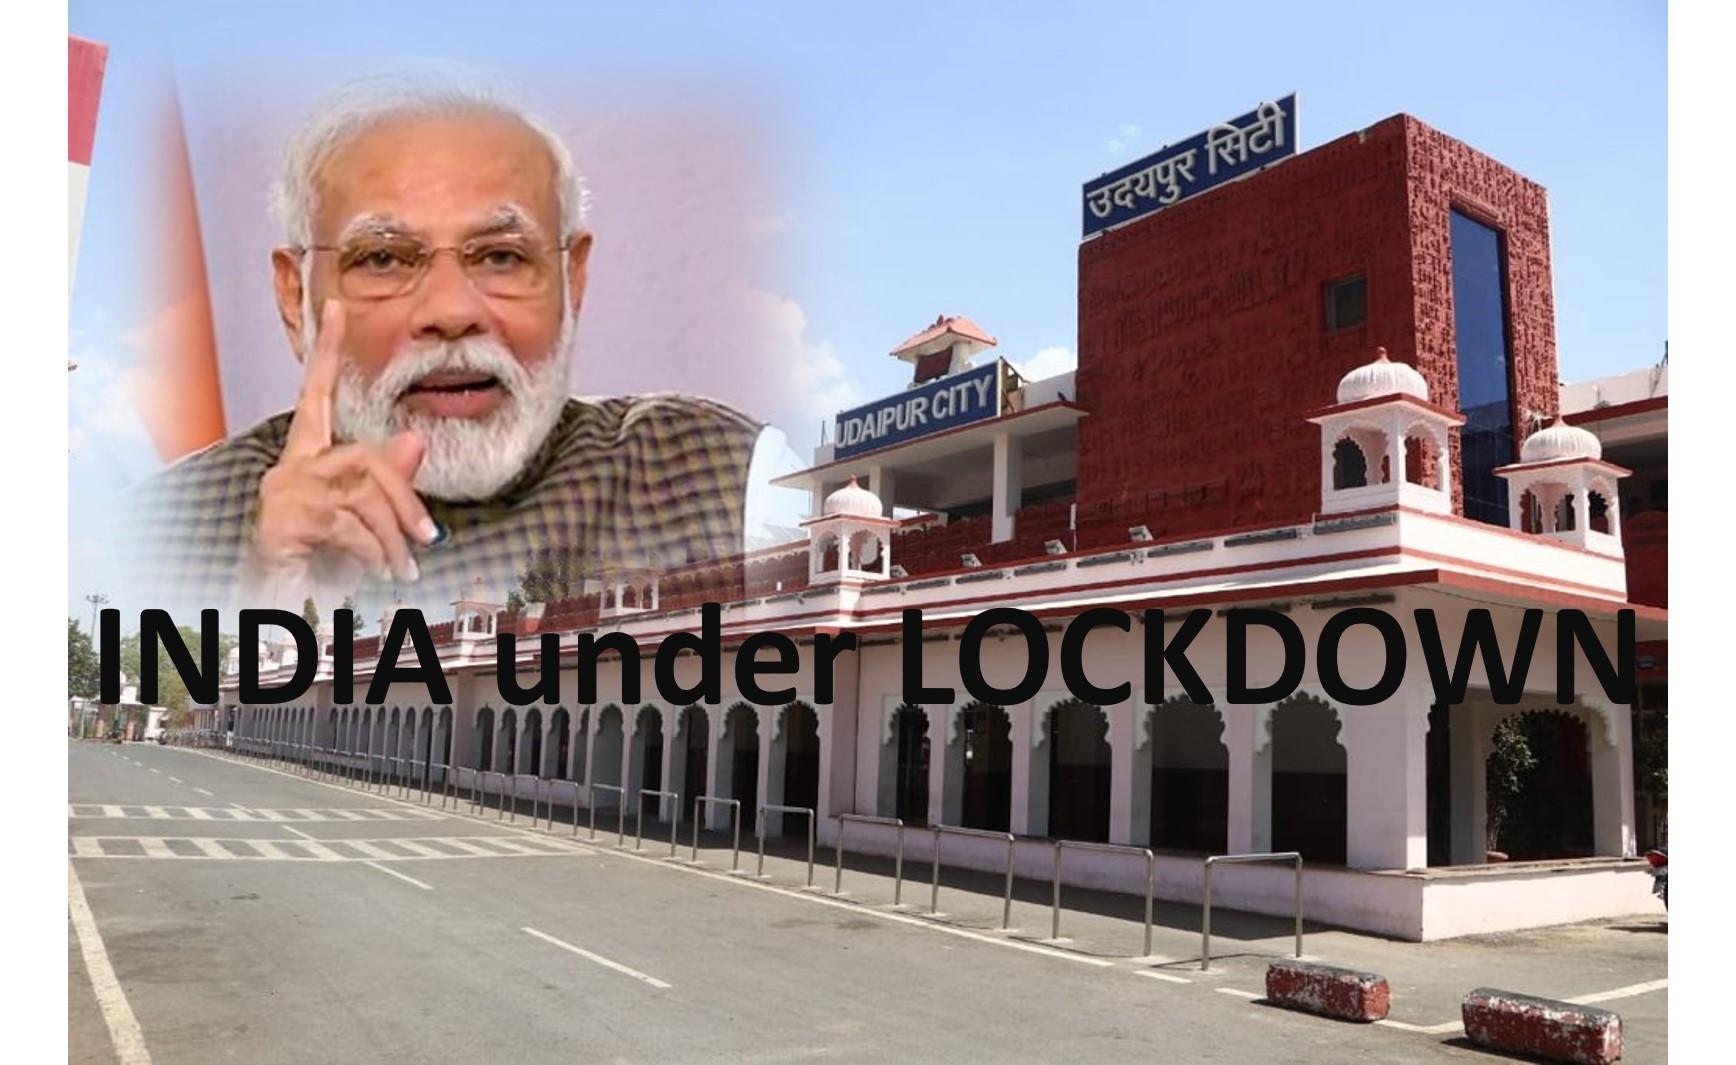 COMPLETE LOCK DOWN IN INDIA from MIDNIGHT today | 21 DAYS Lockdown declared by PM Modi